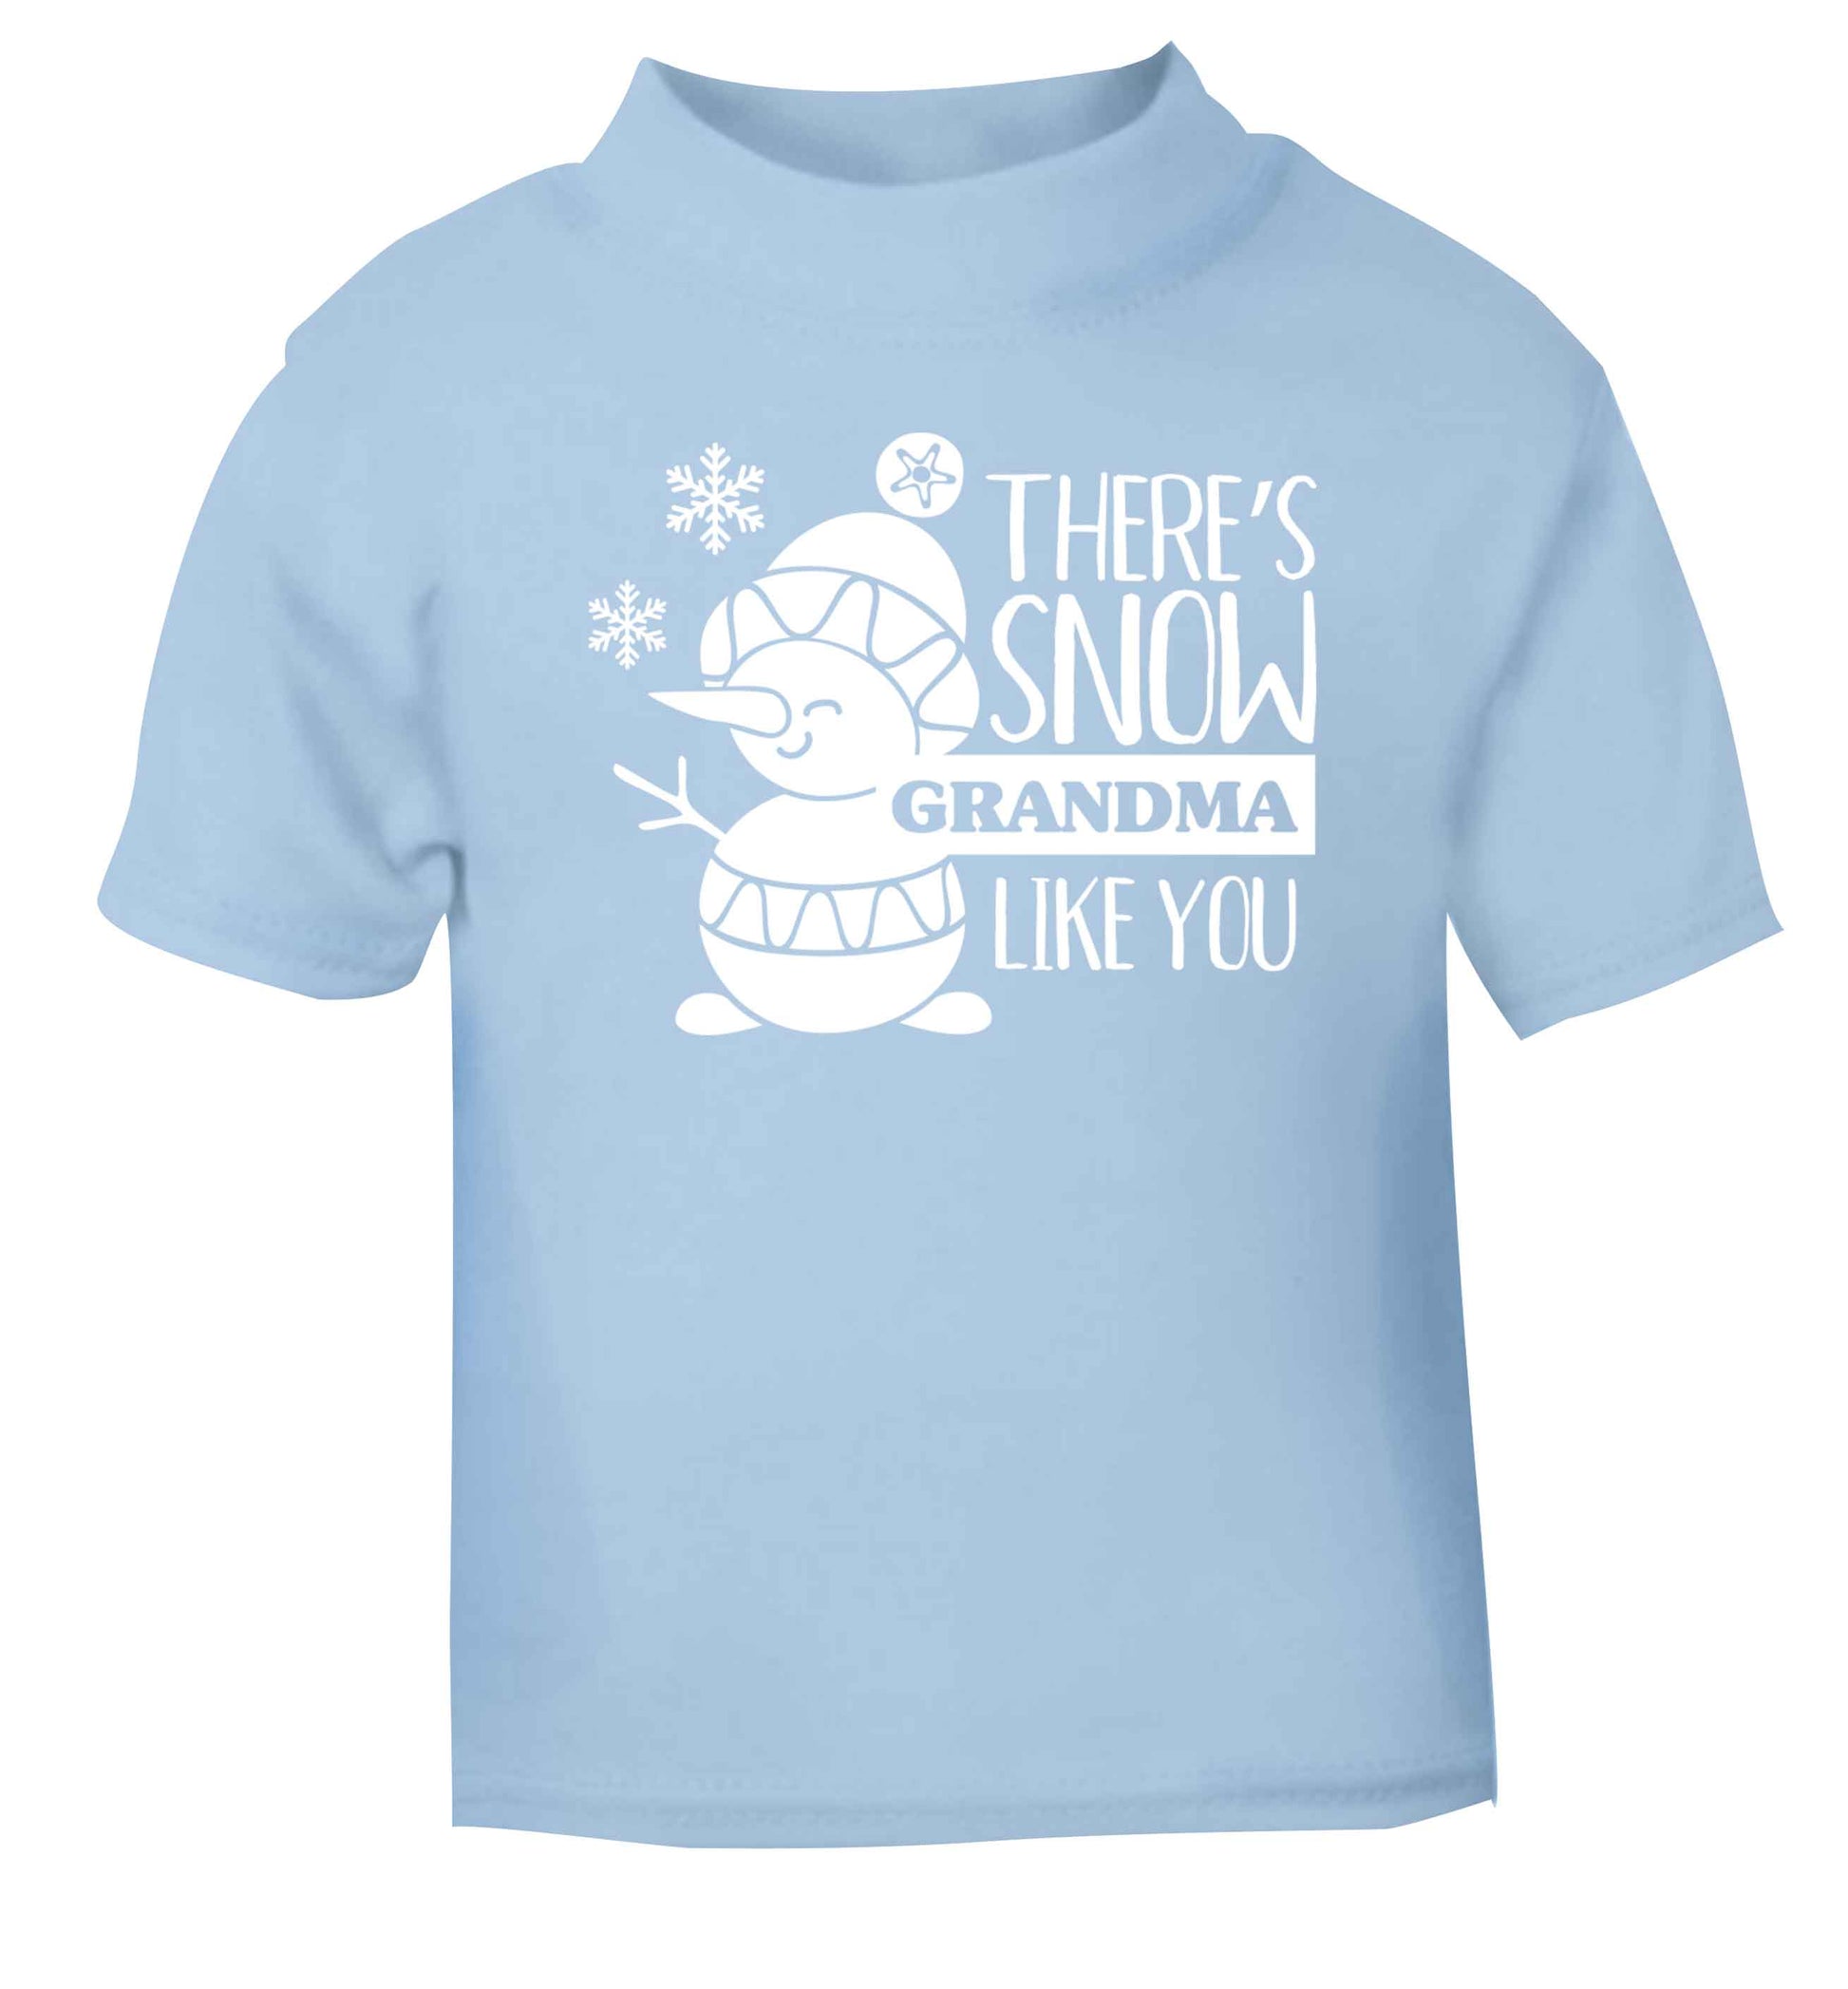 There's snow grandma like you light blue baby toddler Tshirt 2 Years